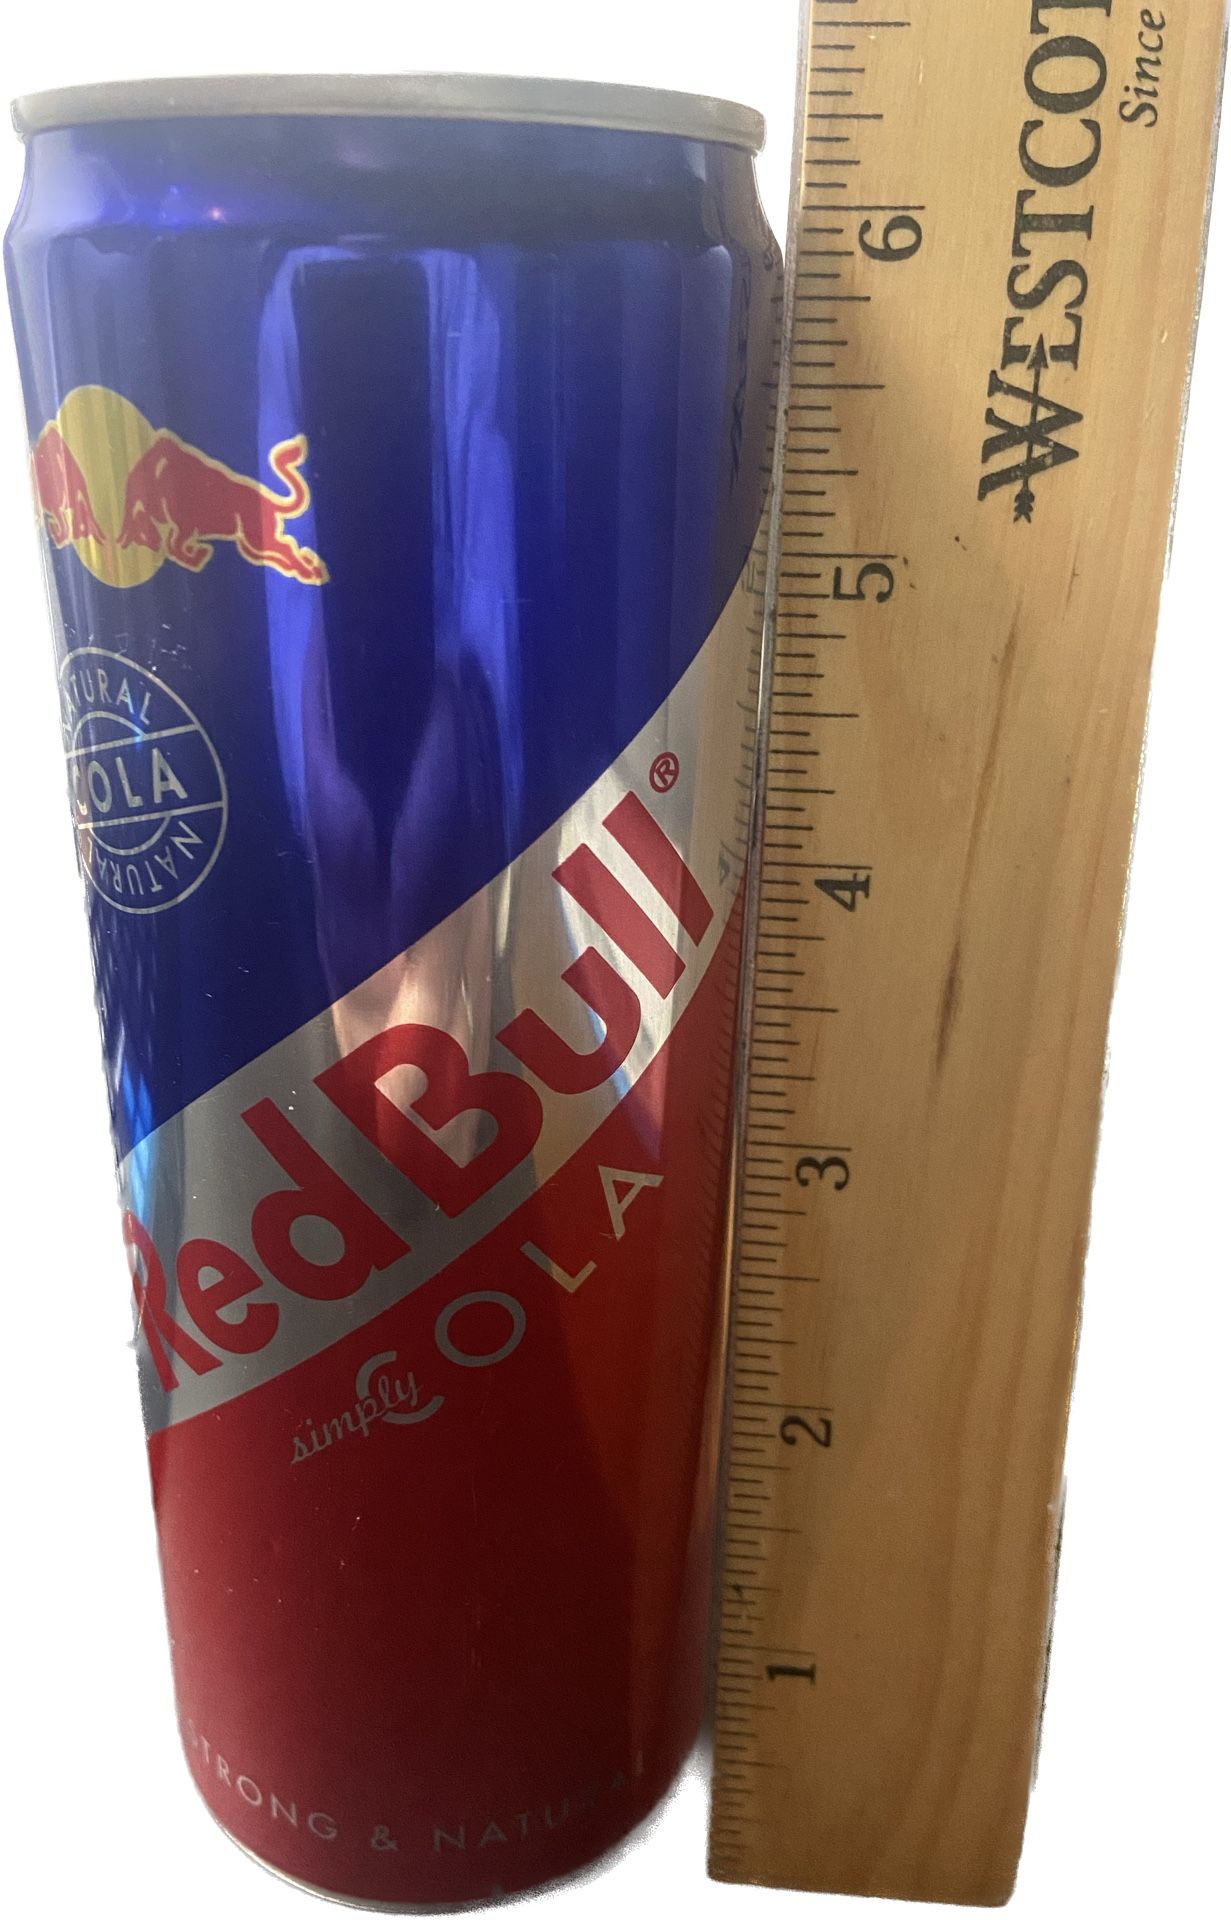 First Try: Red Bull Cola – 2:48AM